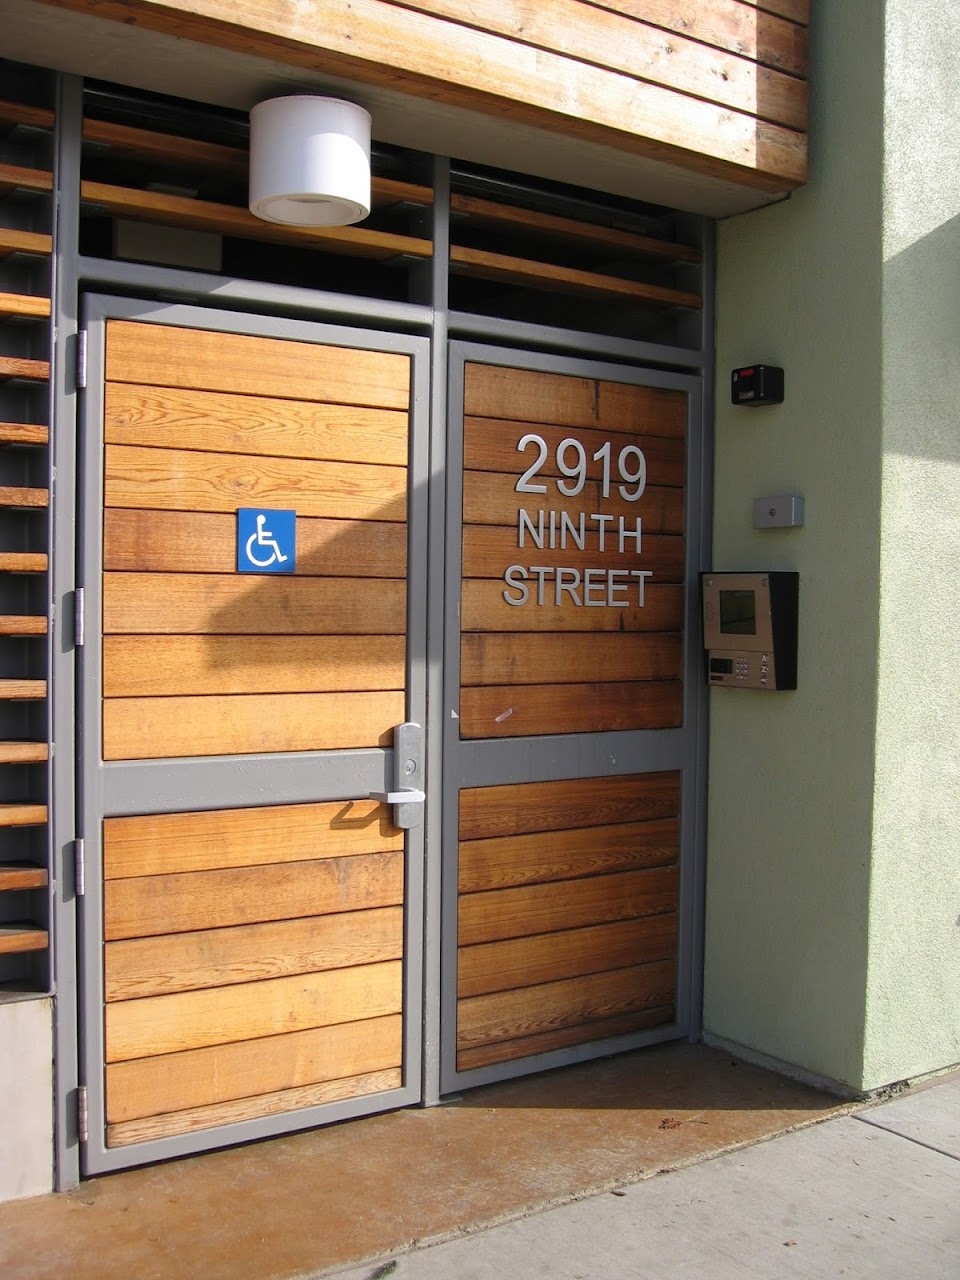 Photo of ASHBY LOFTS. Affordable housing located at 2919 NINTH ST BERKELEY, CA 94710